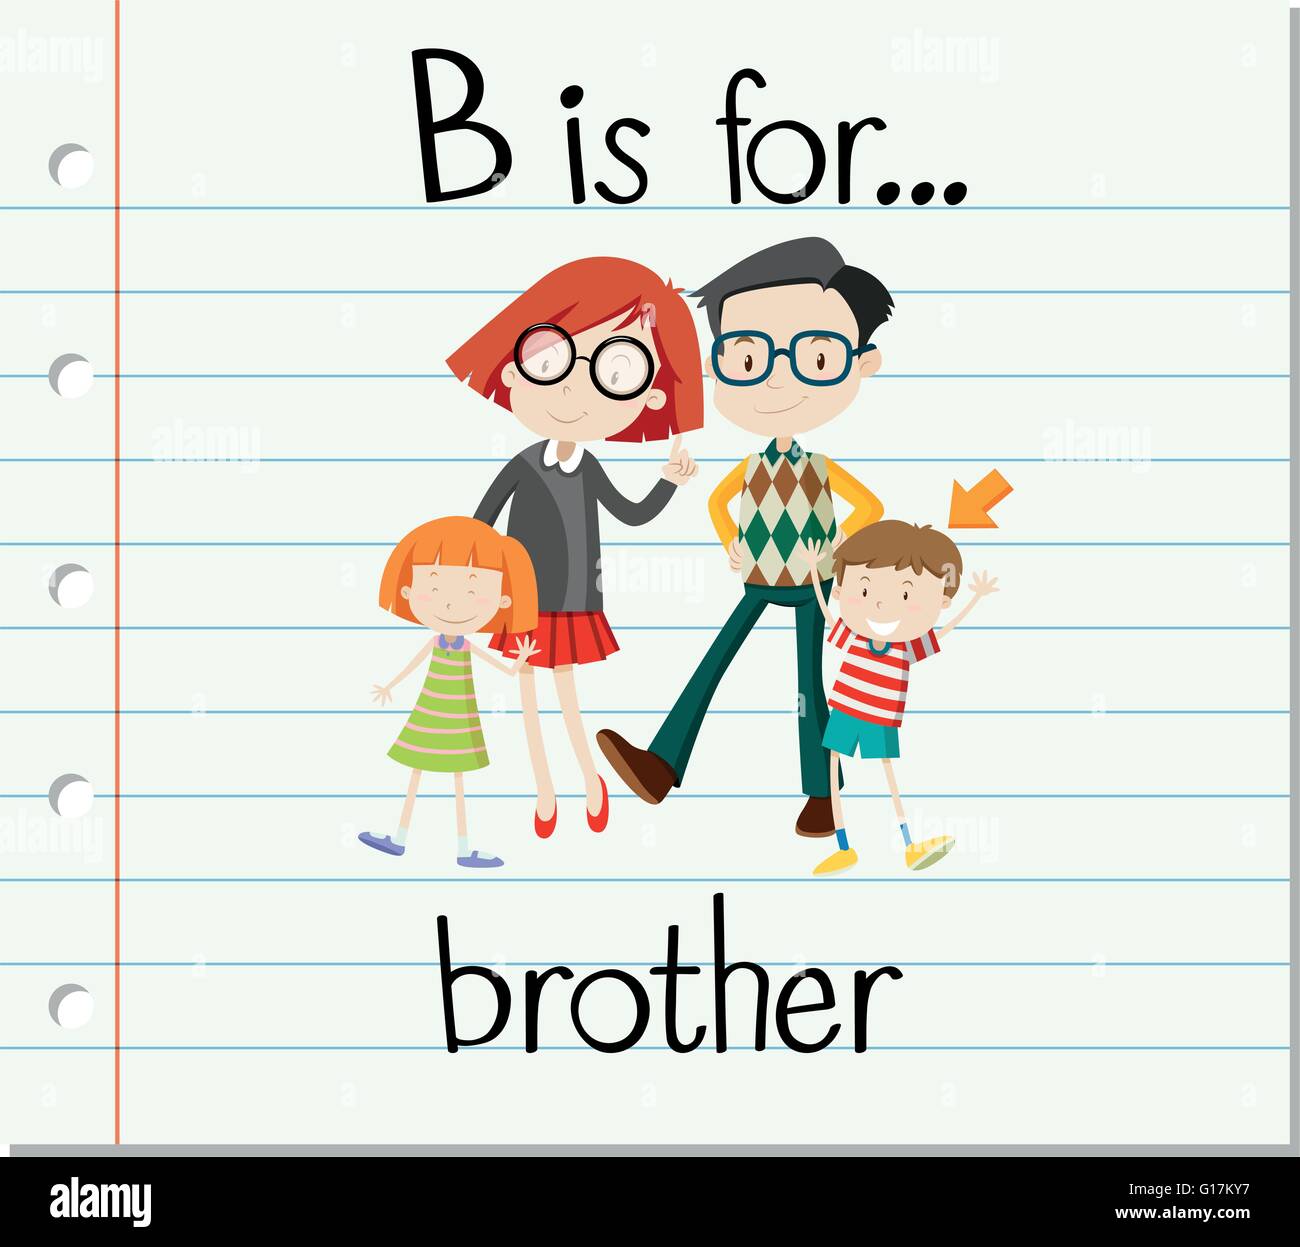 Flashcard letter B is for brother illustration Stock Vector